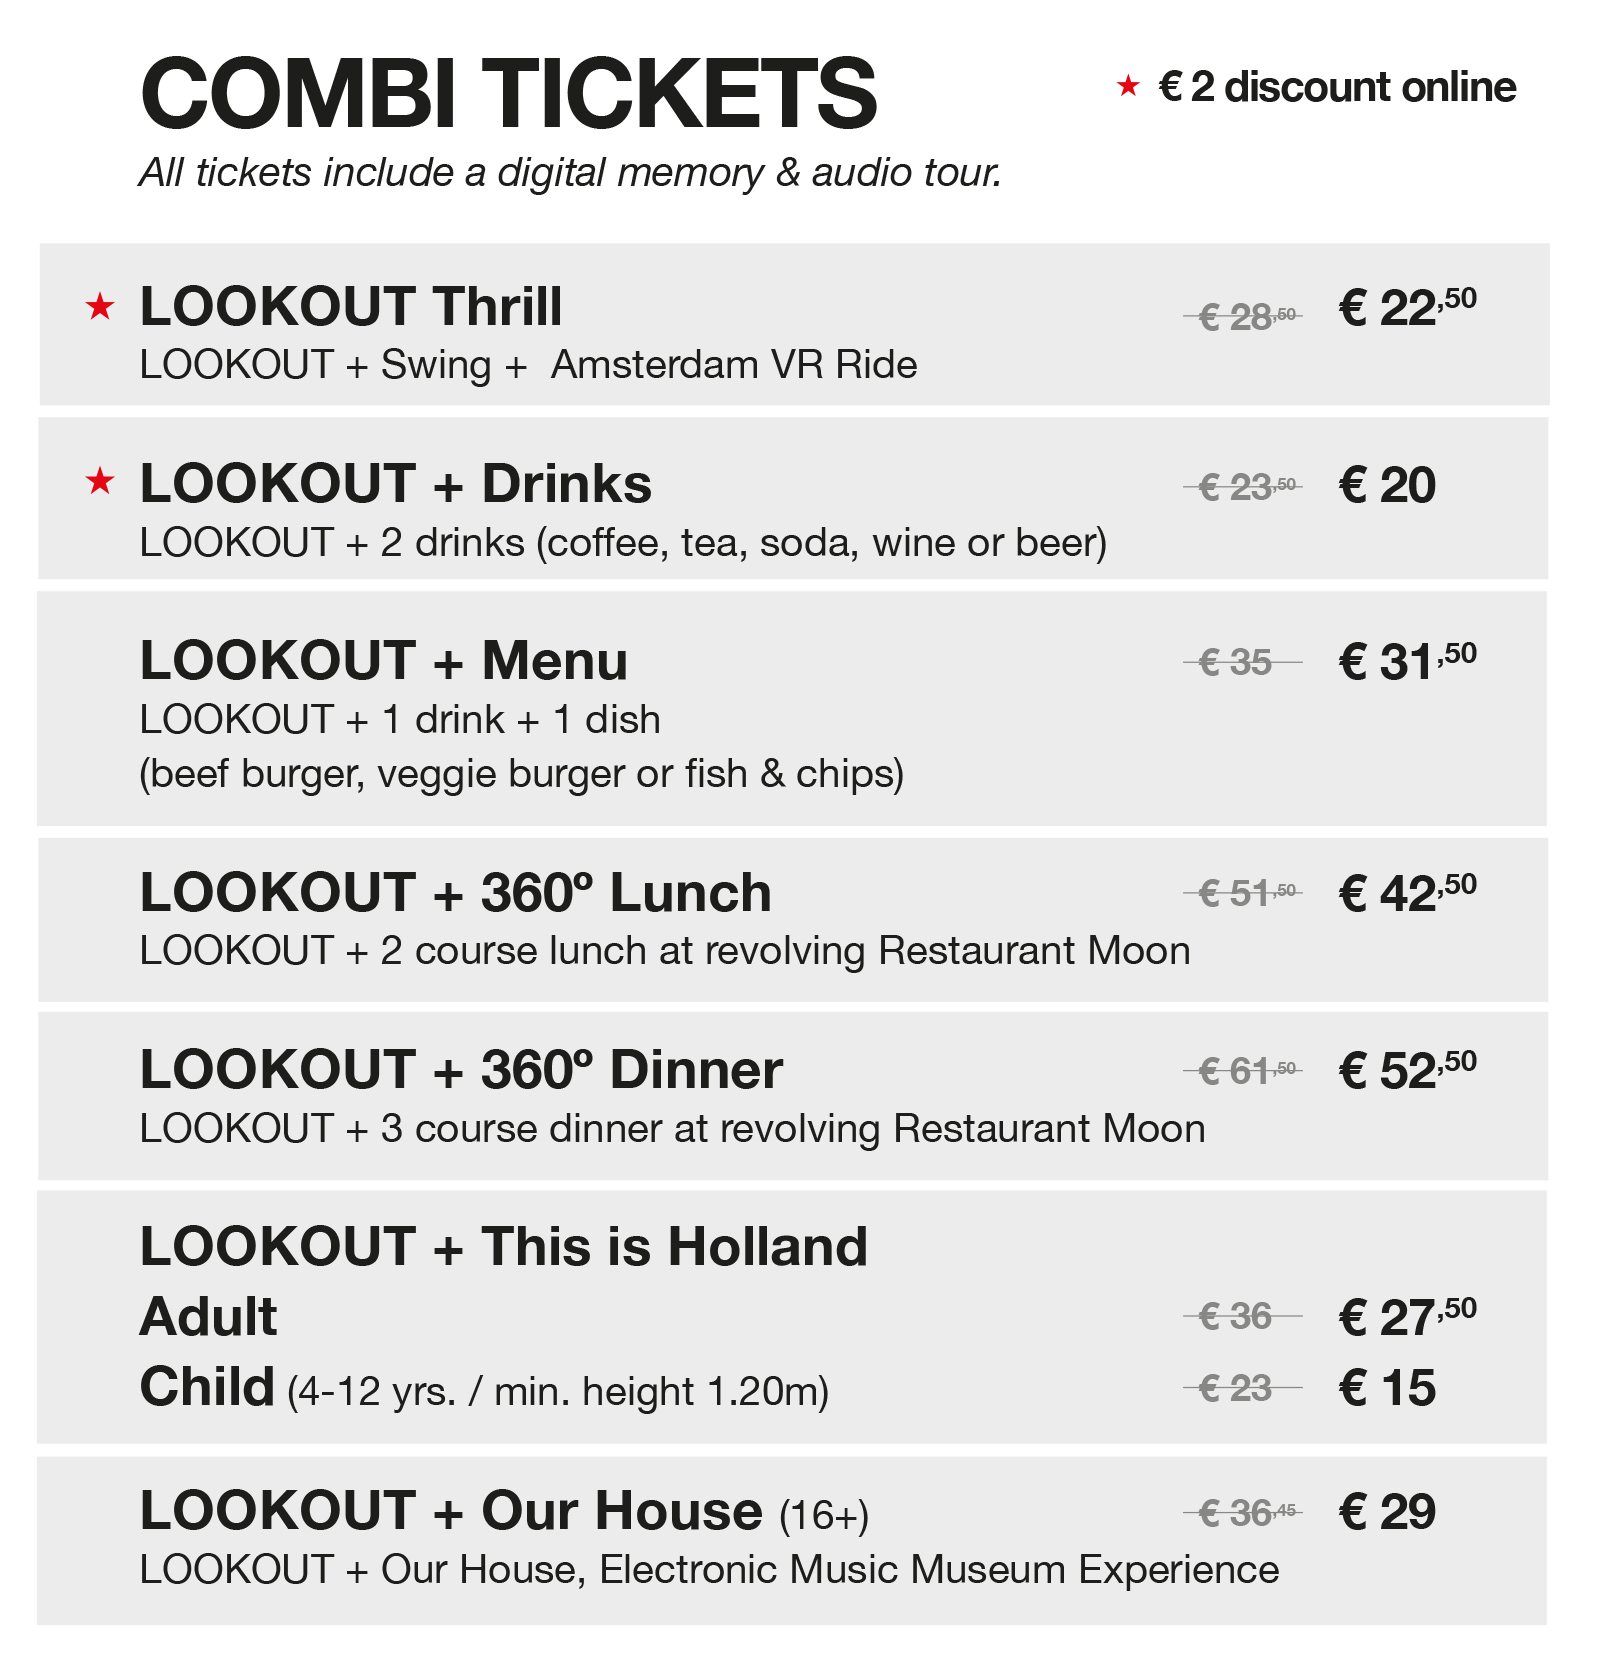 Prices combi | A'DAM LOOKOUT